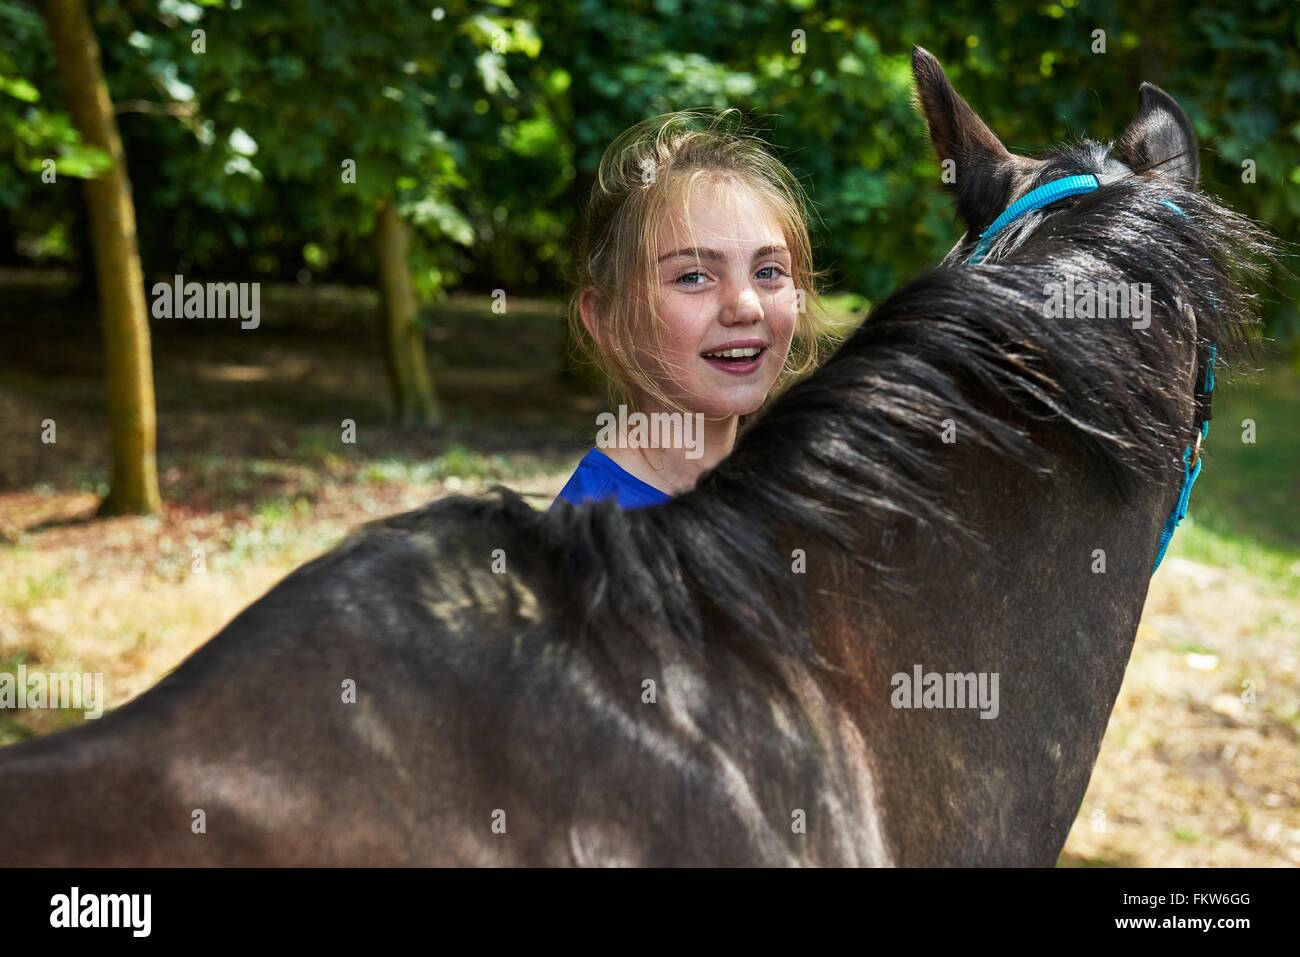 Head and shoulders of girl with horse looking at camera smiling Stock Photo